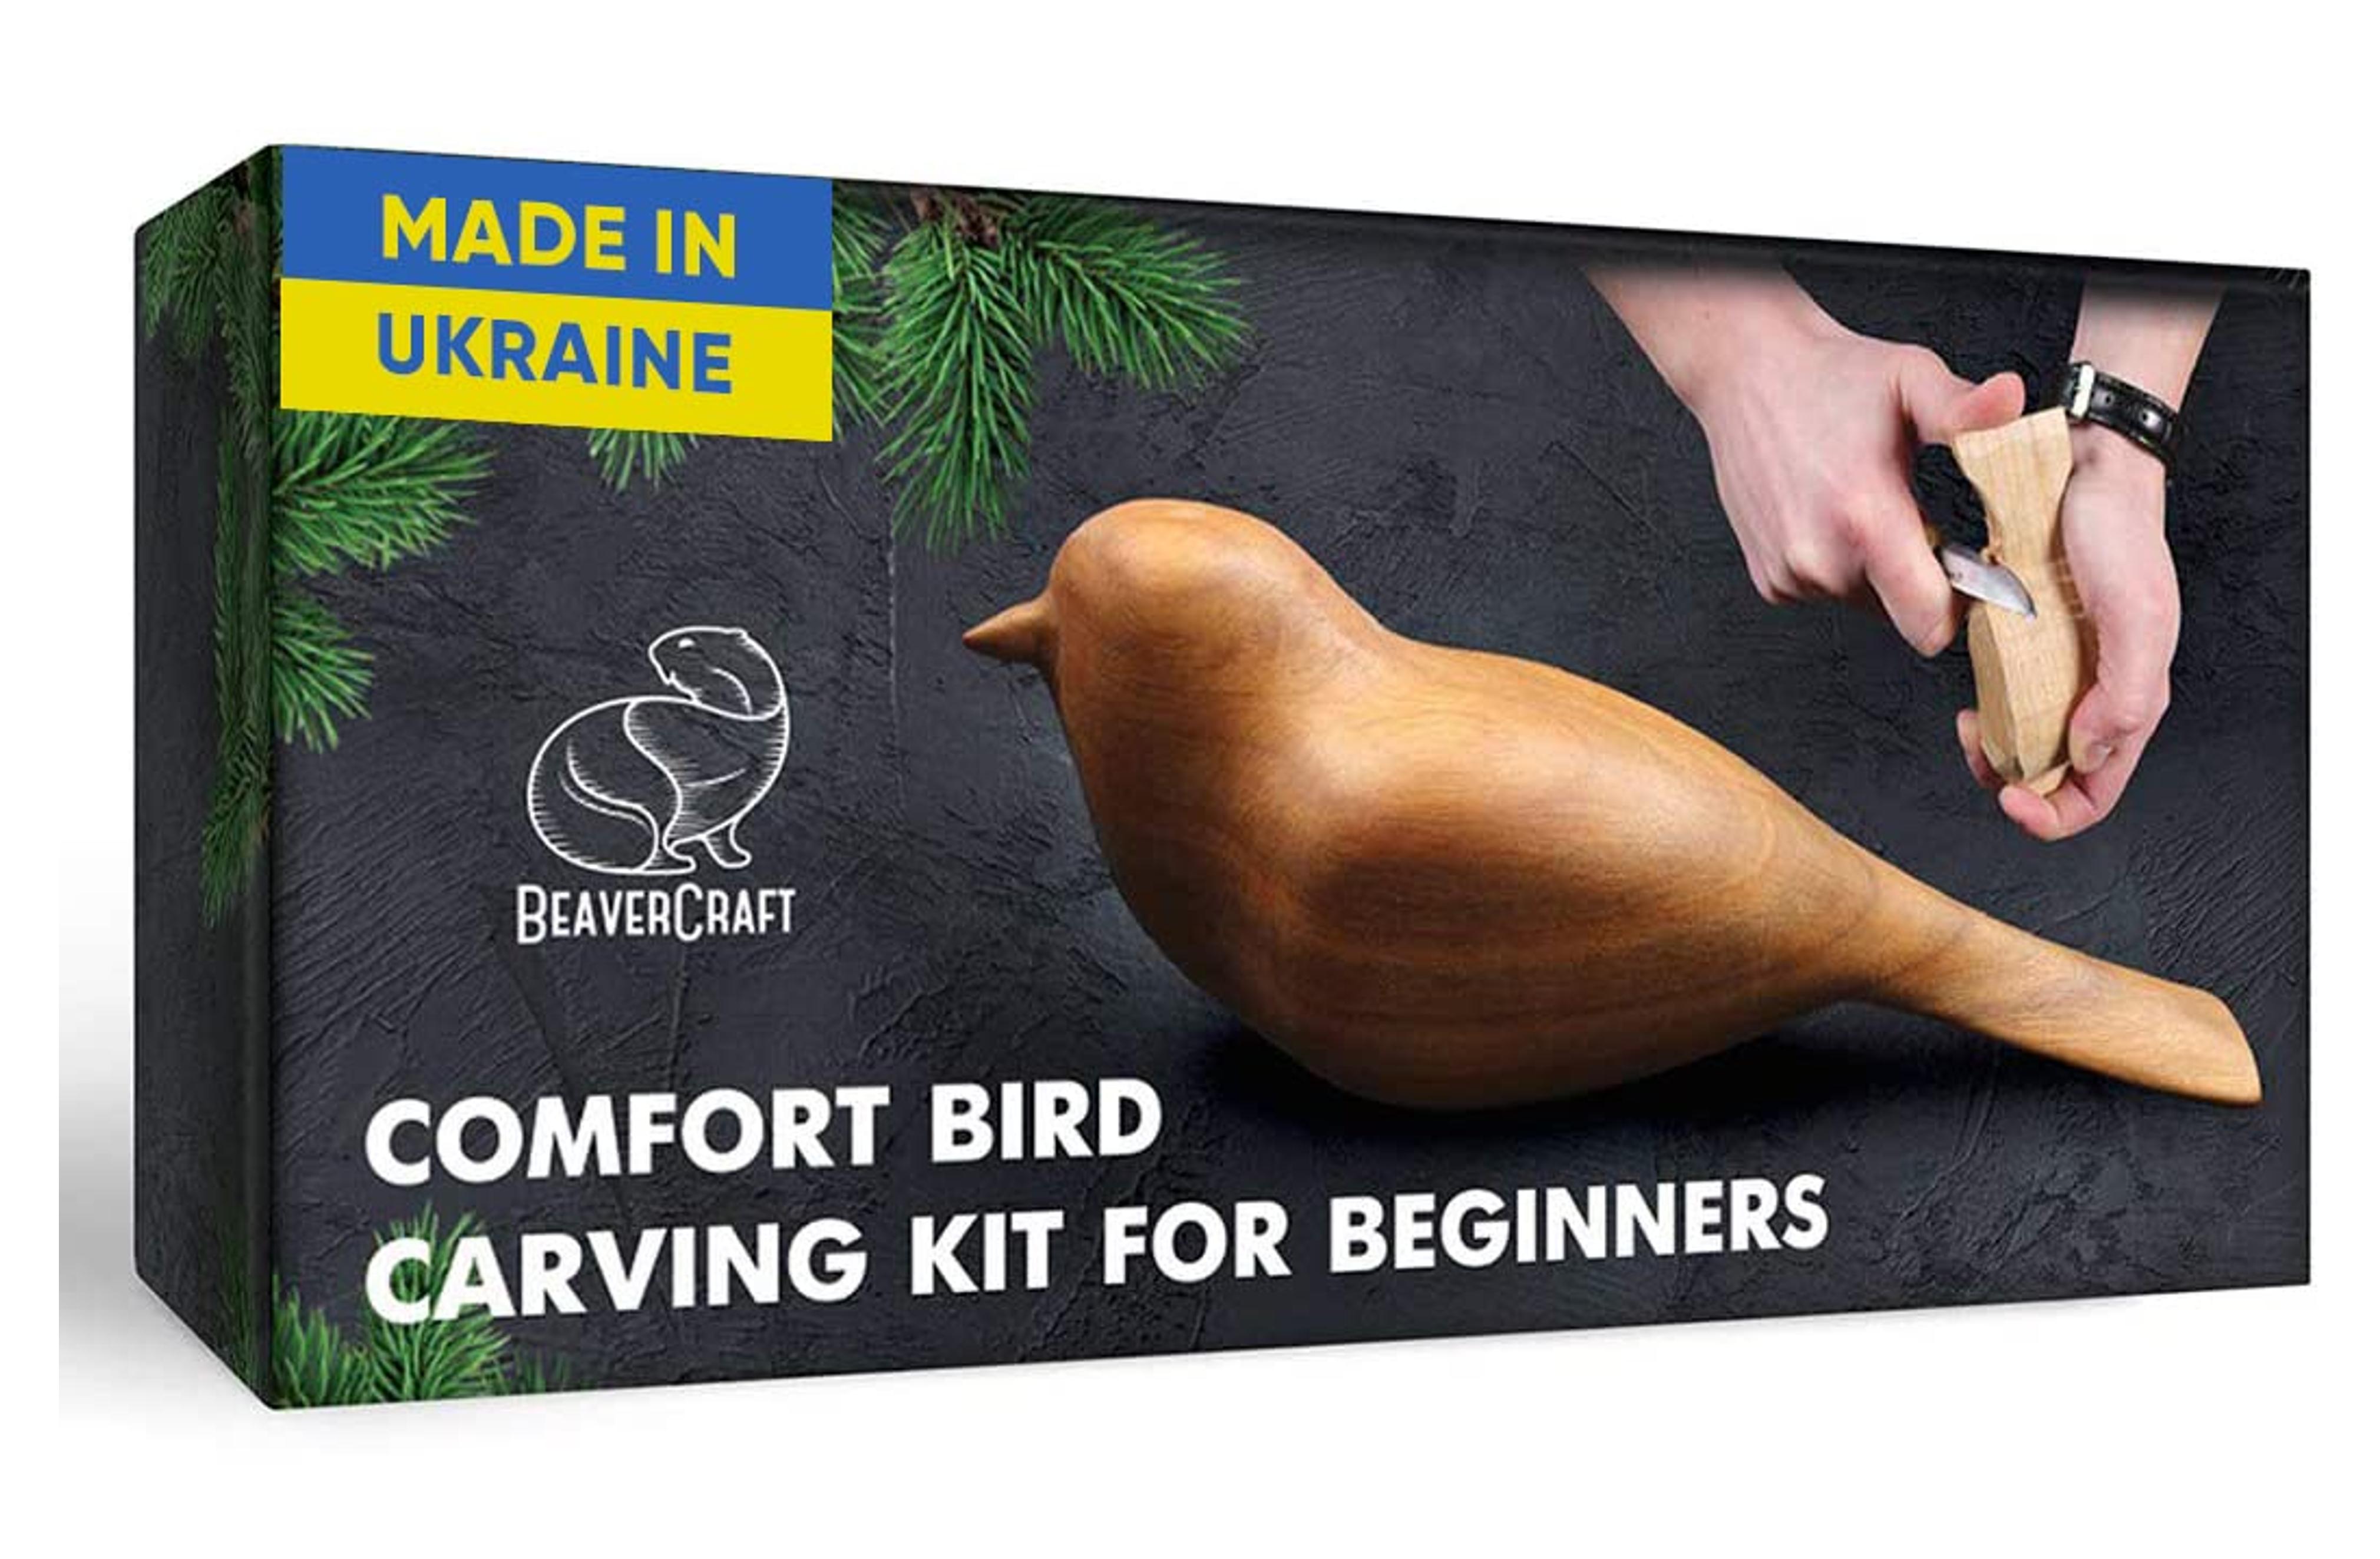 BeaverCraft, Wood Carving Kit Comfort Bird DIY - Complete Starter Whittling Knife Kit for Beginners Adults and Teens - Book Fun Project Carve Hobby - Learning Woodworking